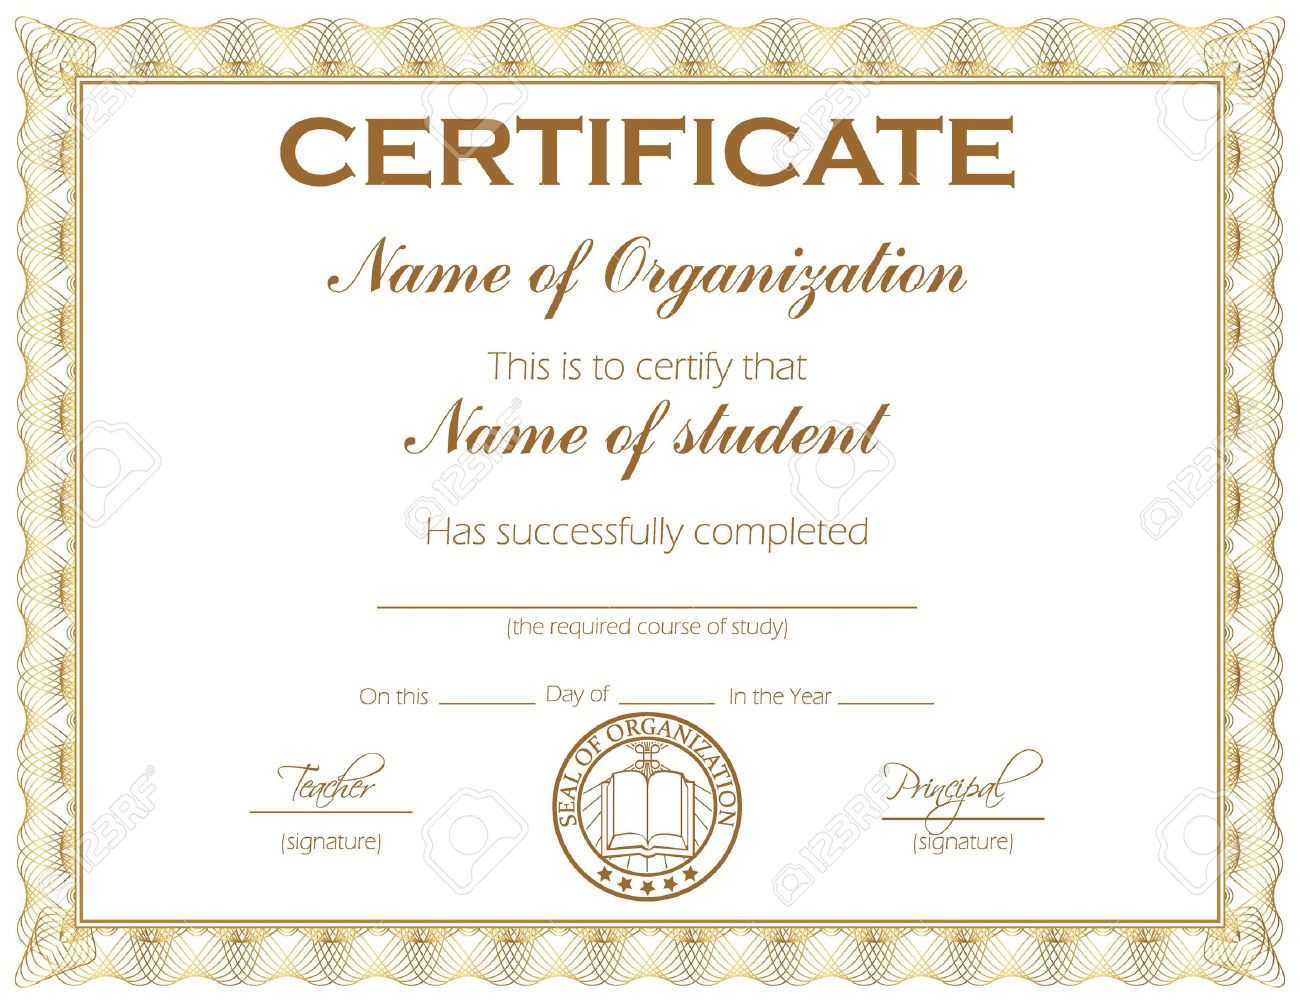 General Purpose Certificate Or Award With Sample Text That Can.. Regarding Template For Certificate Of Award